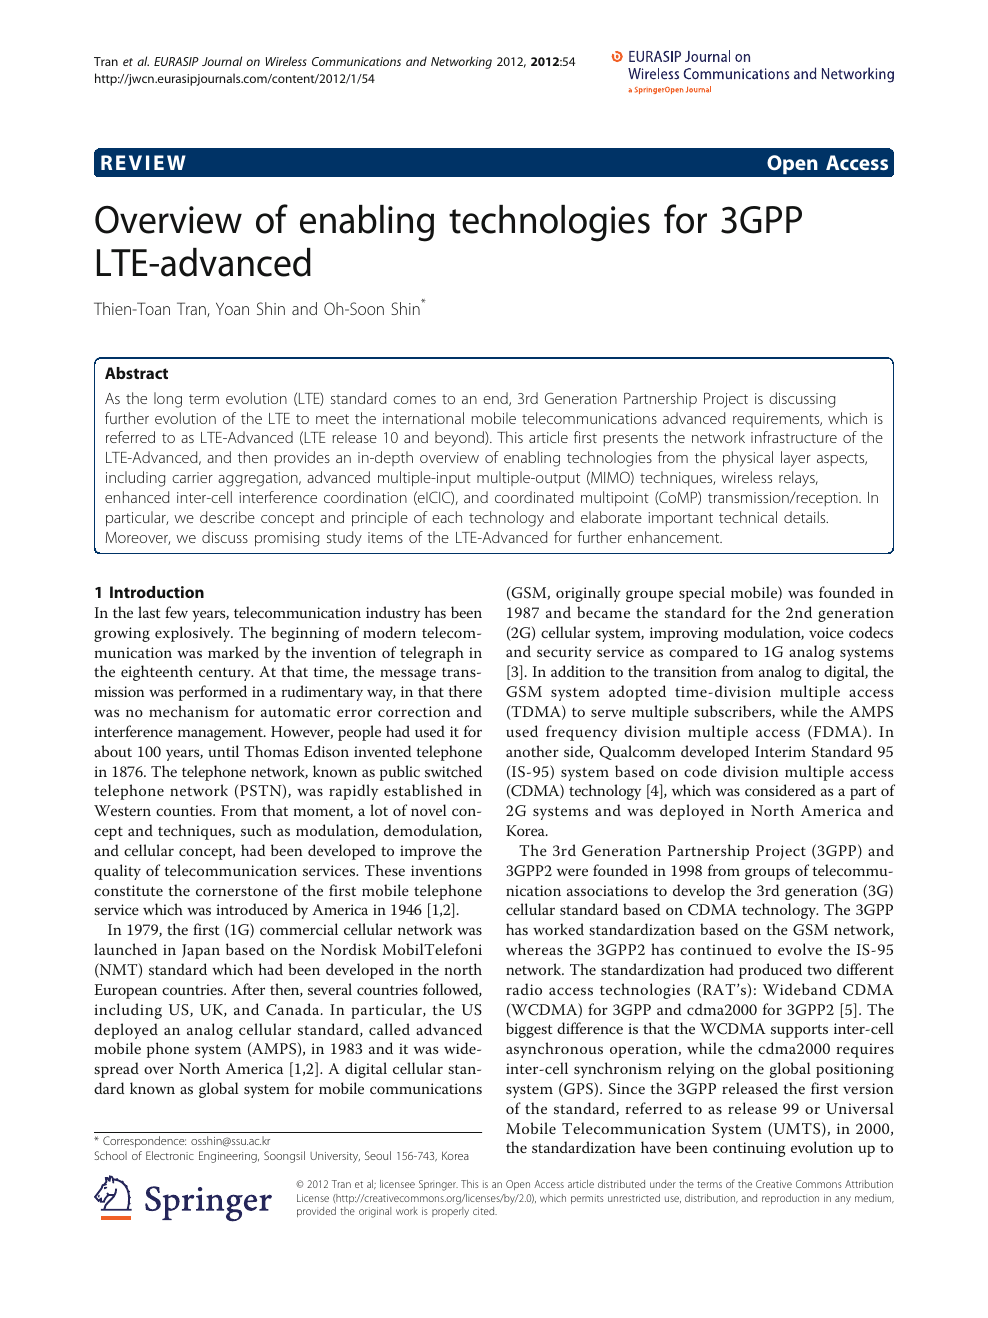 Overview of enabling technologies for 3GPP LTE-advanced – topic of